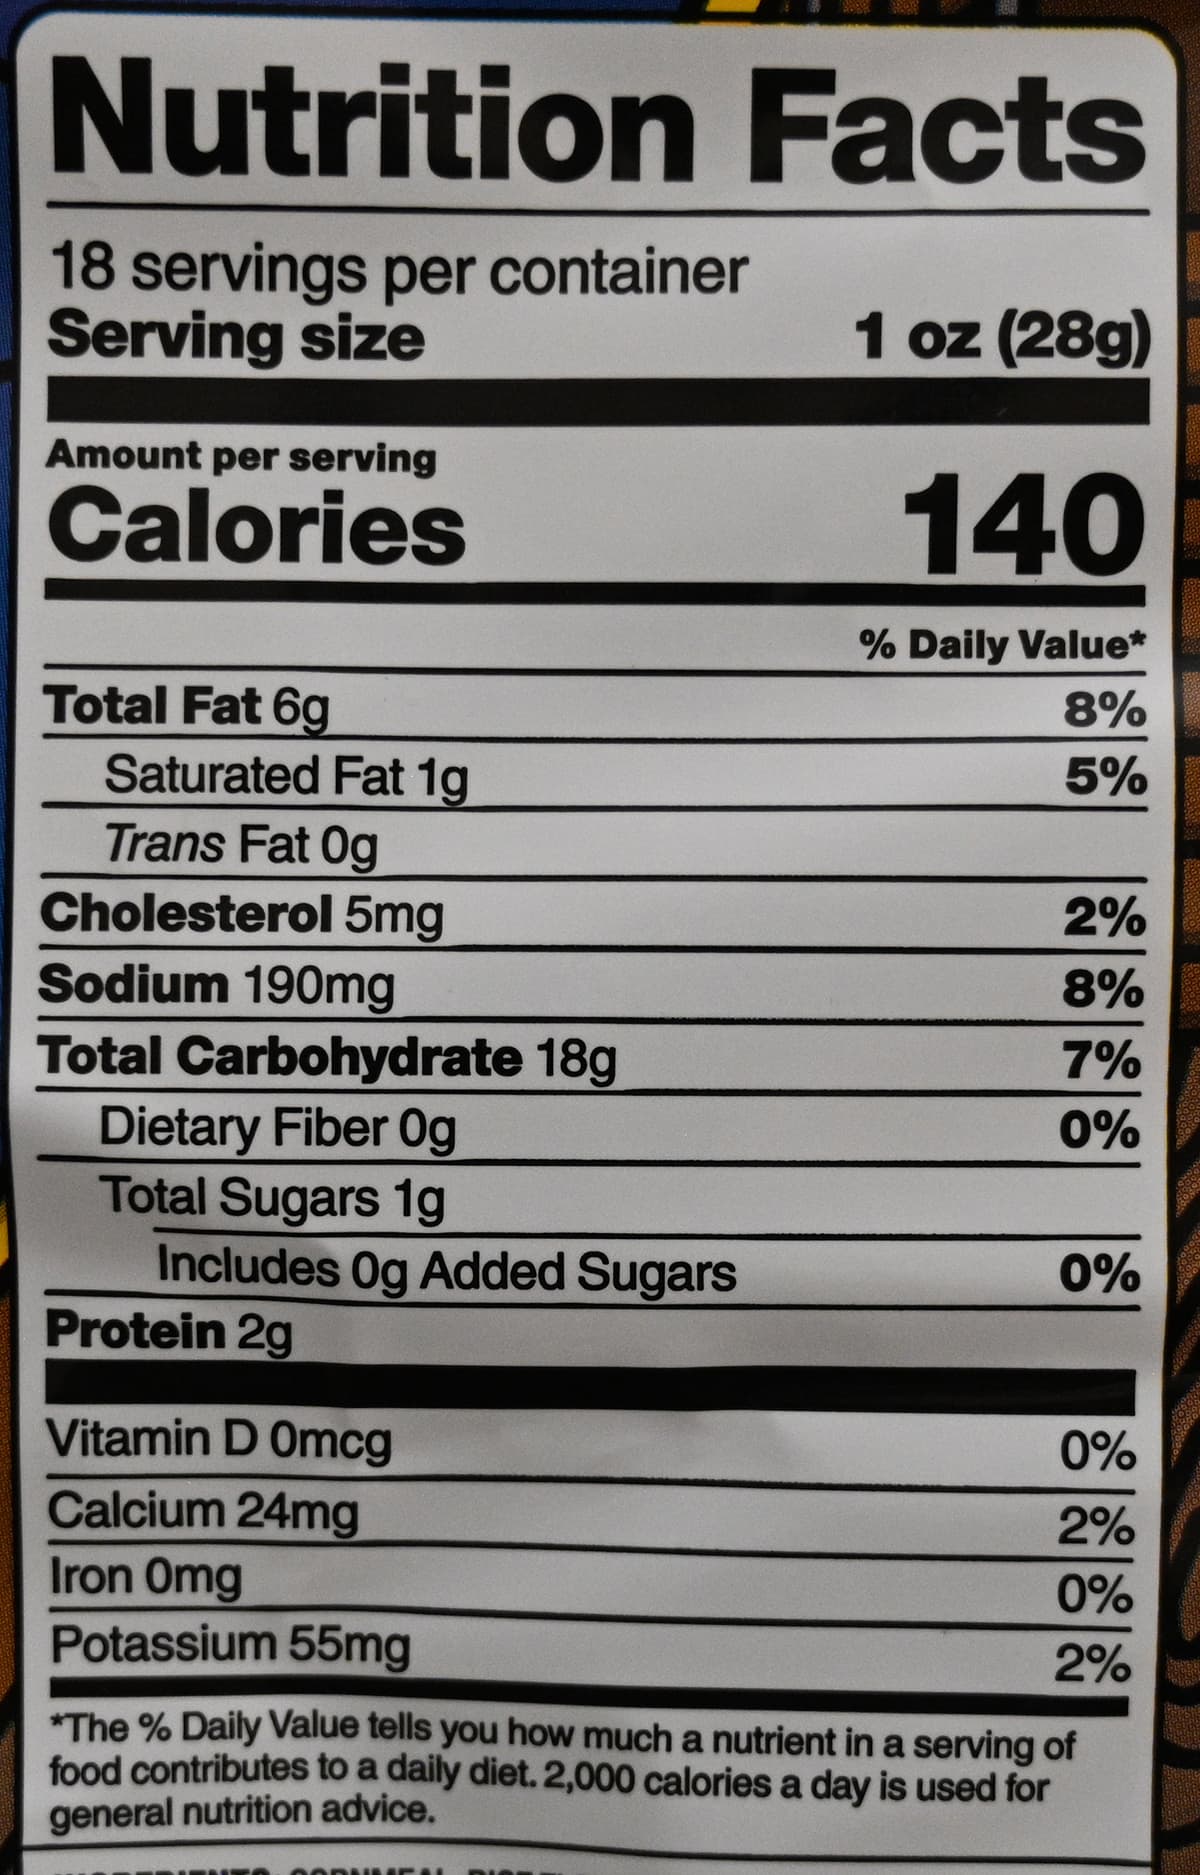 Image of the nutrition facts for the Pirate's Booty from the back of the bag.